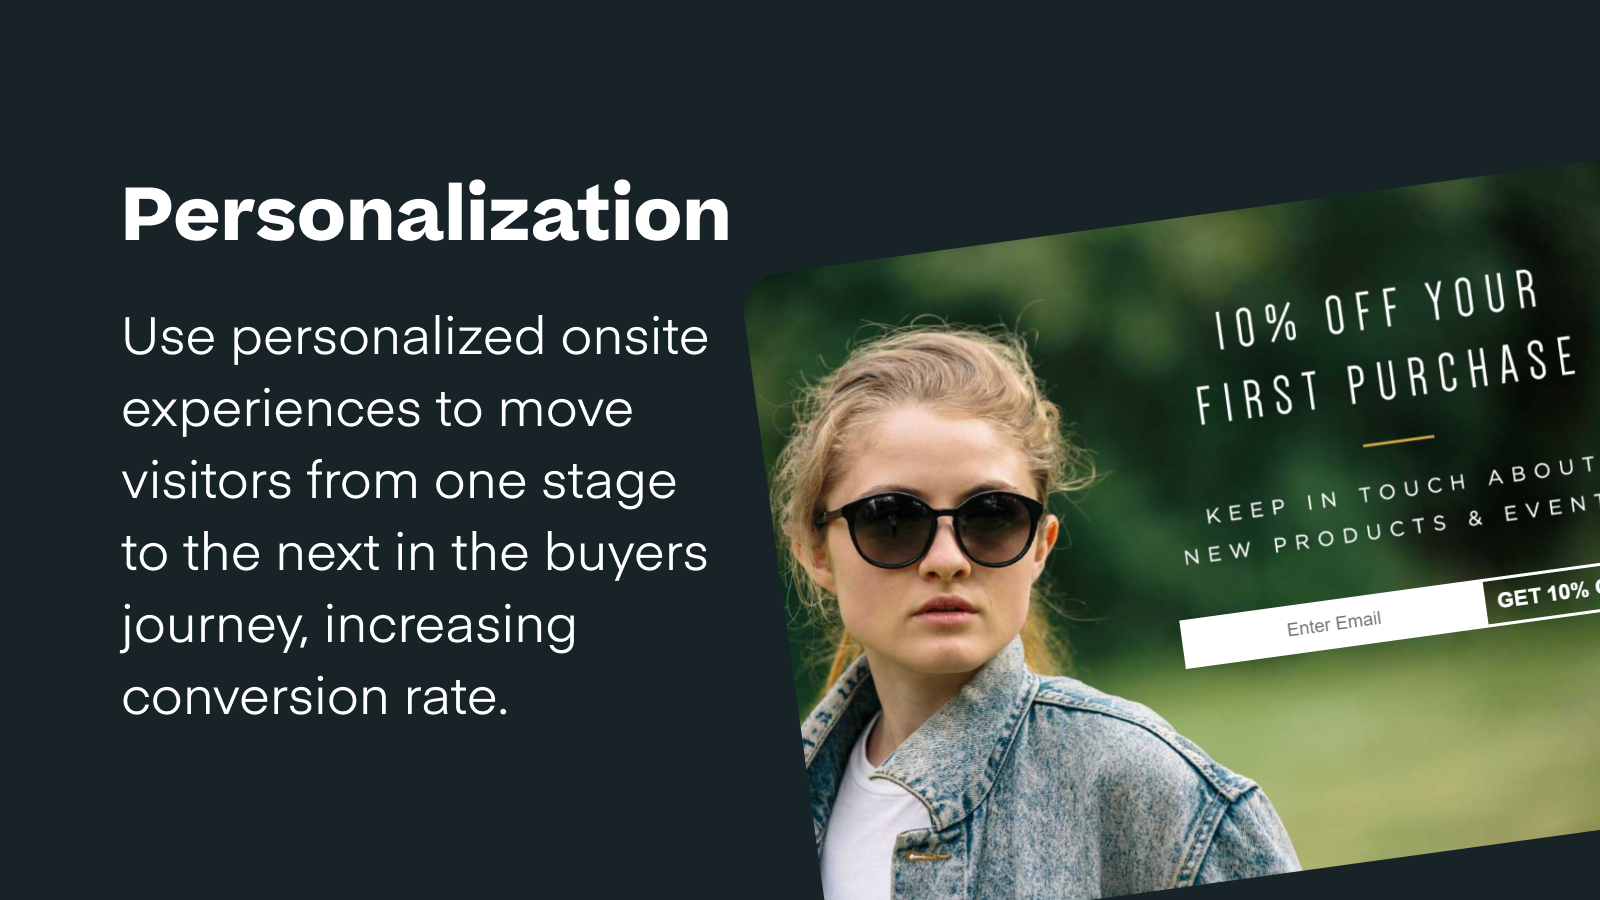 Personalization - Use personalized onsite experiences